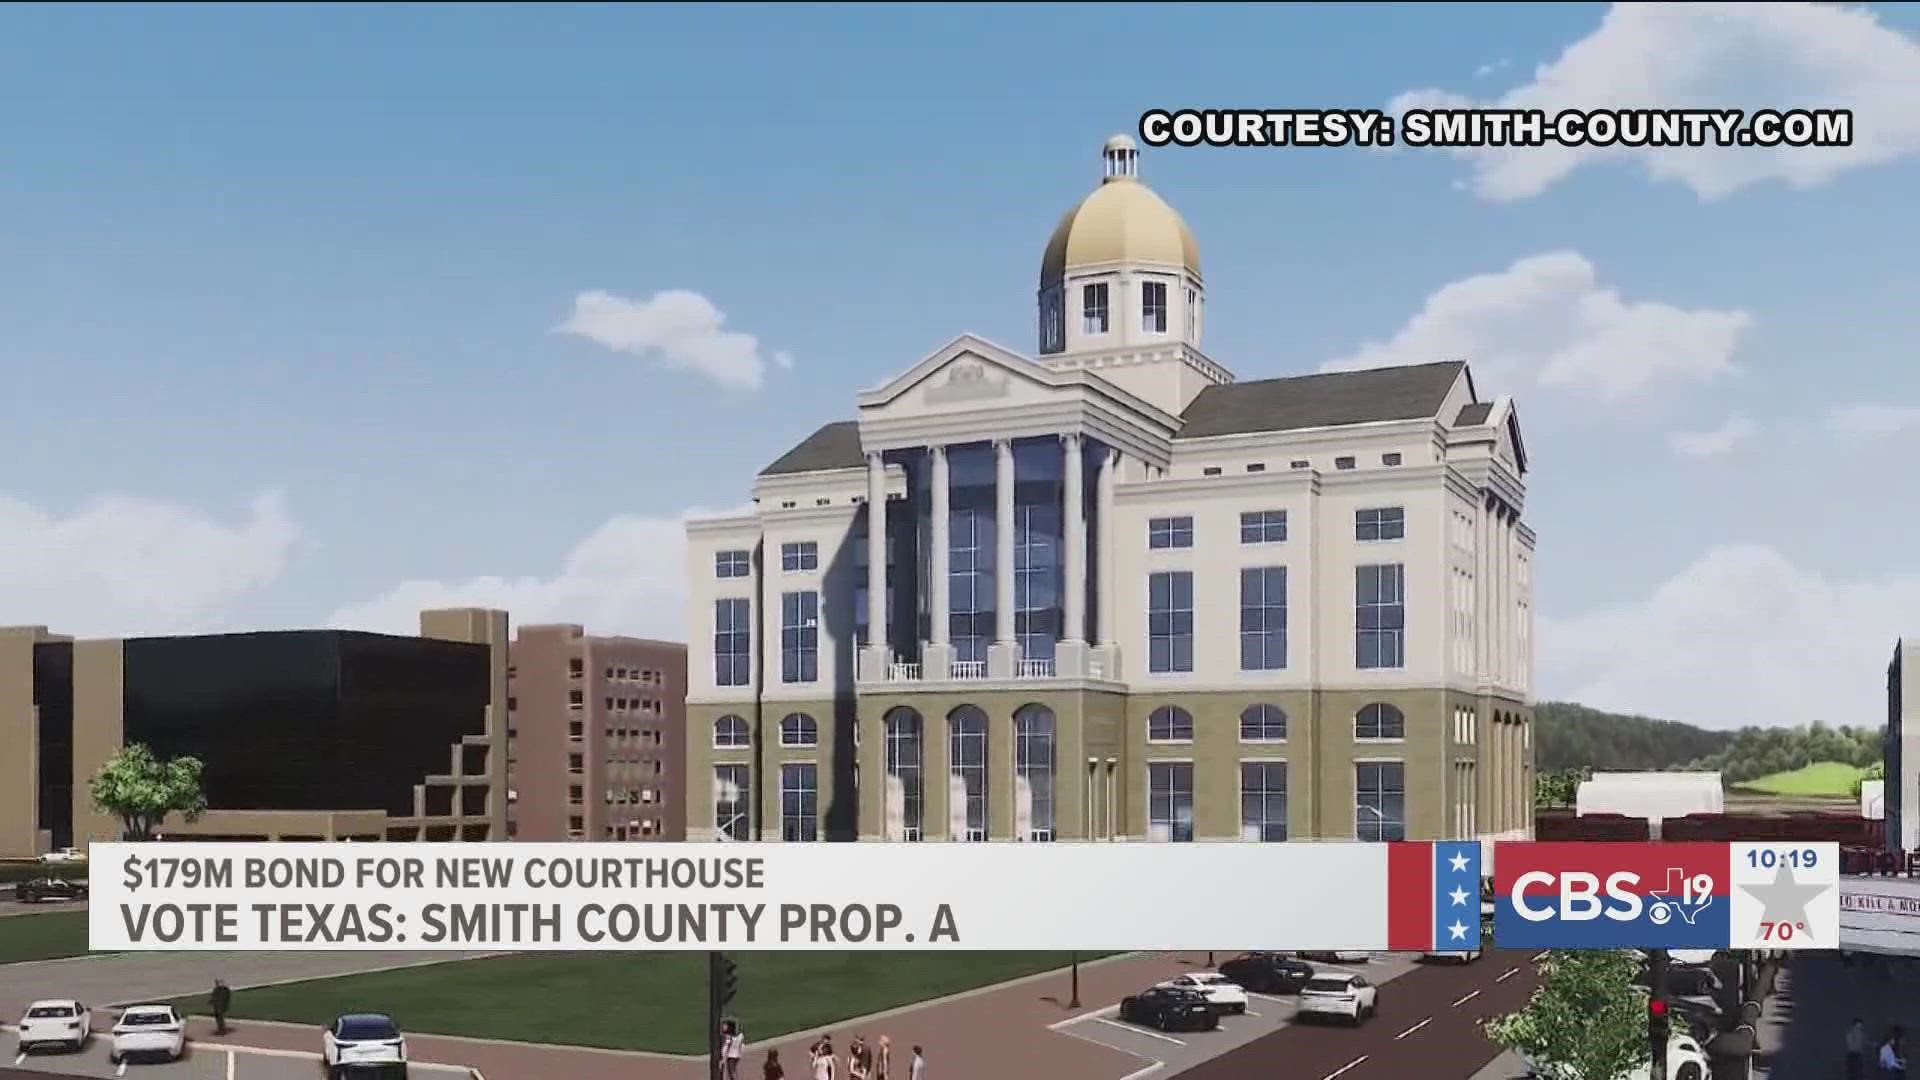 The courthouse will cost around $160 million. In addition to the new courthouse, a $19 million parking garage will also be constructed that holds 550 vehicles.